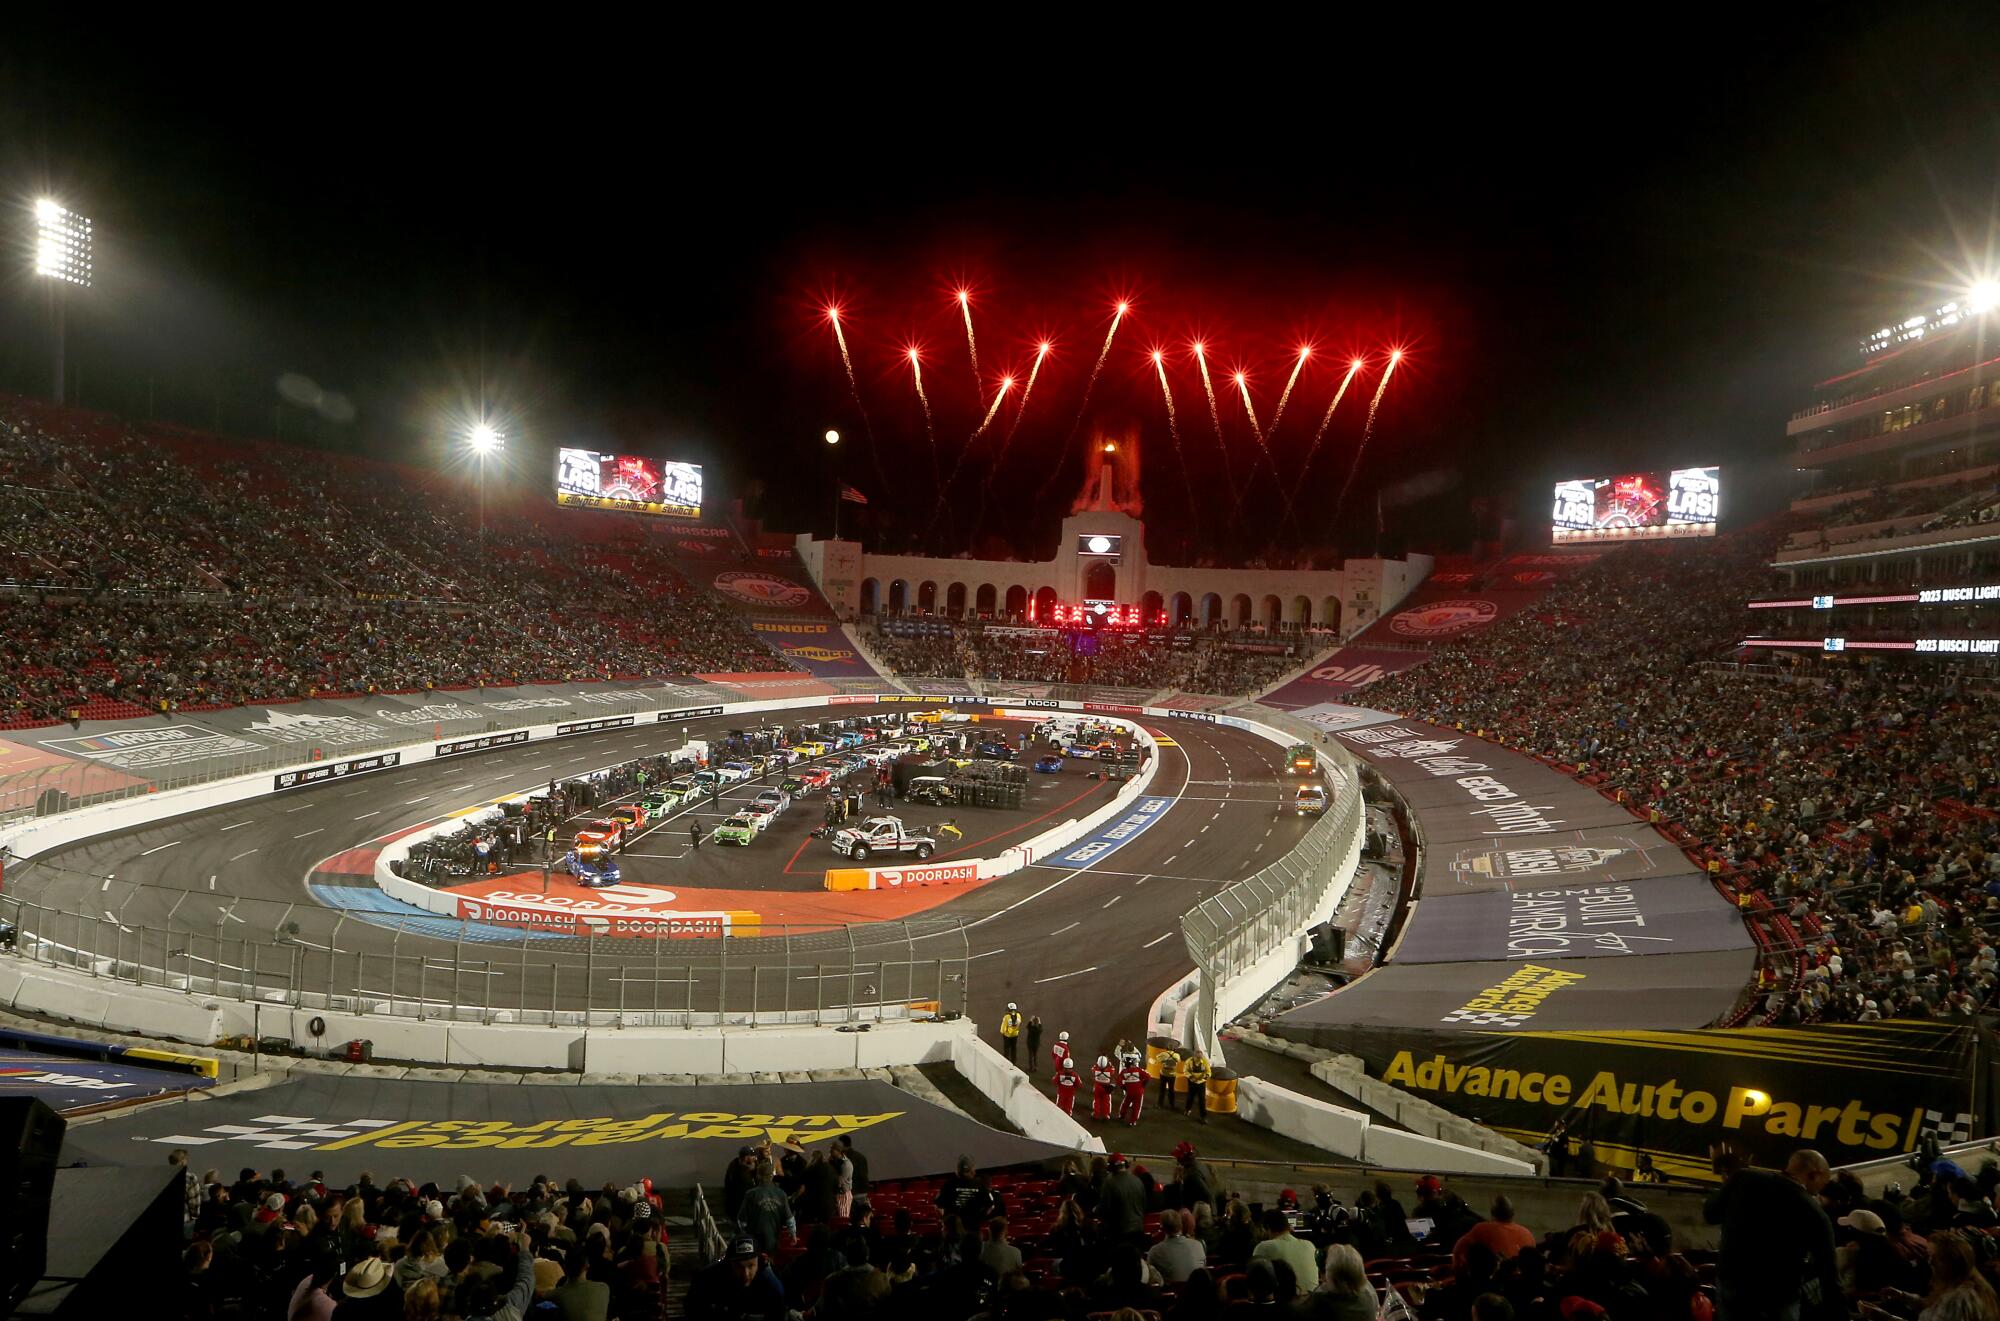 Fireworks light up the night sky during an intermission for NASCAR's Clash at the Coliseum.